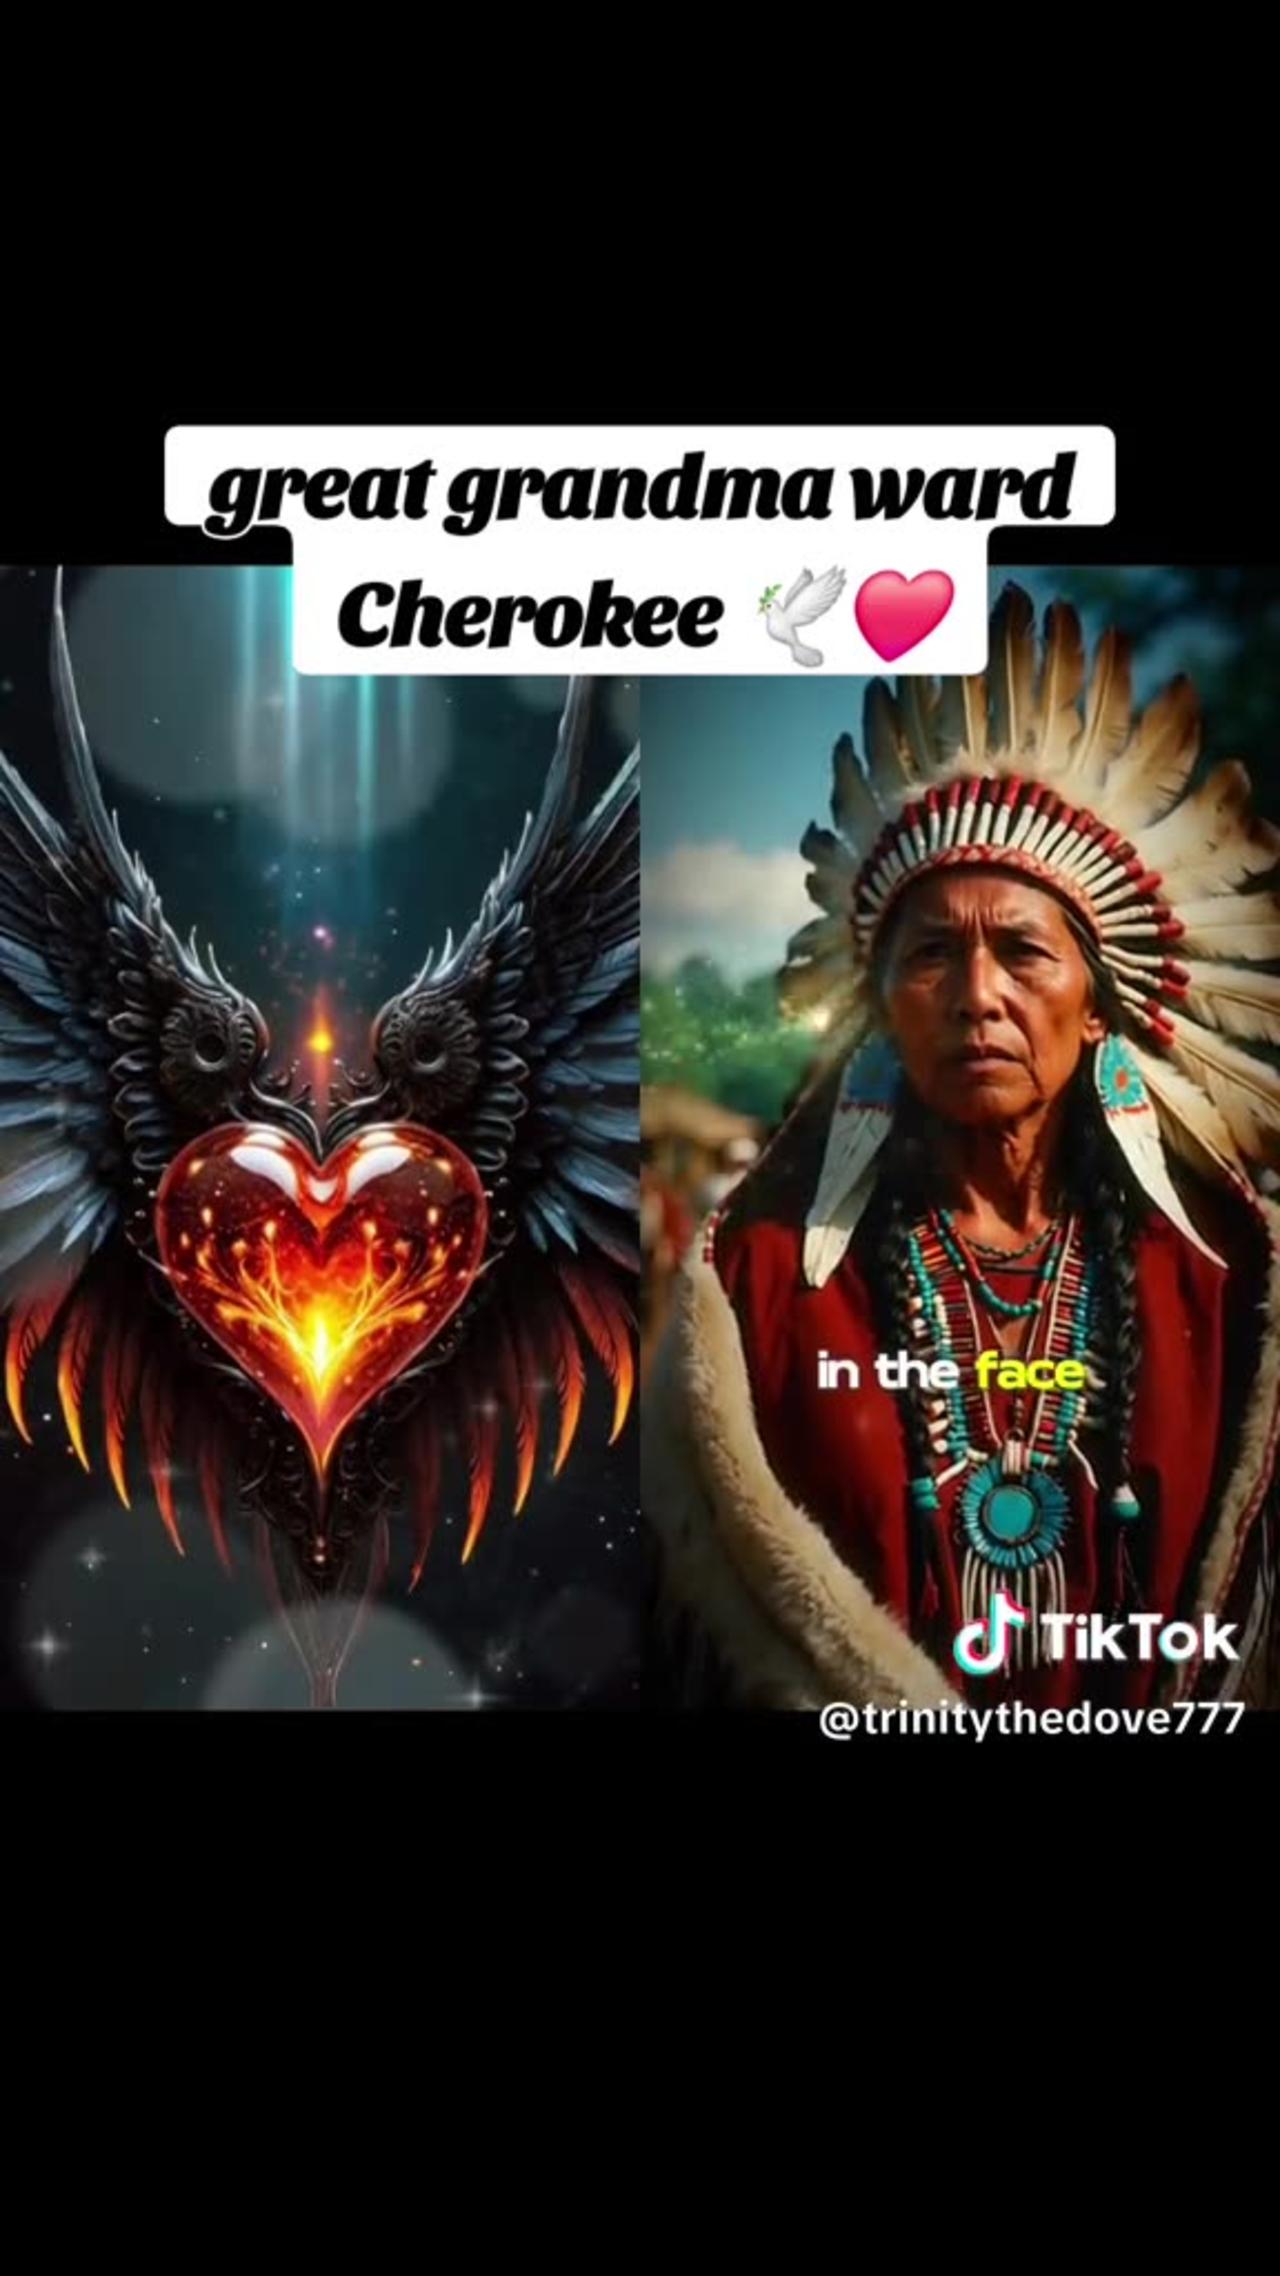 Did U Know That The Cherokee Indians Are One Of The Most Sophisticated Native Americans Tribes In The World?